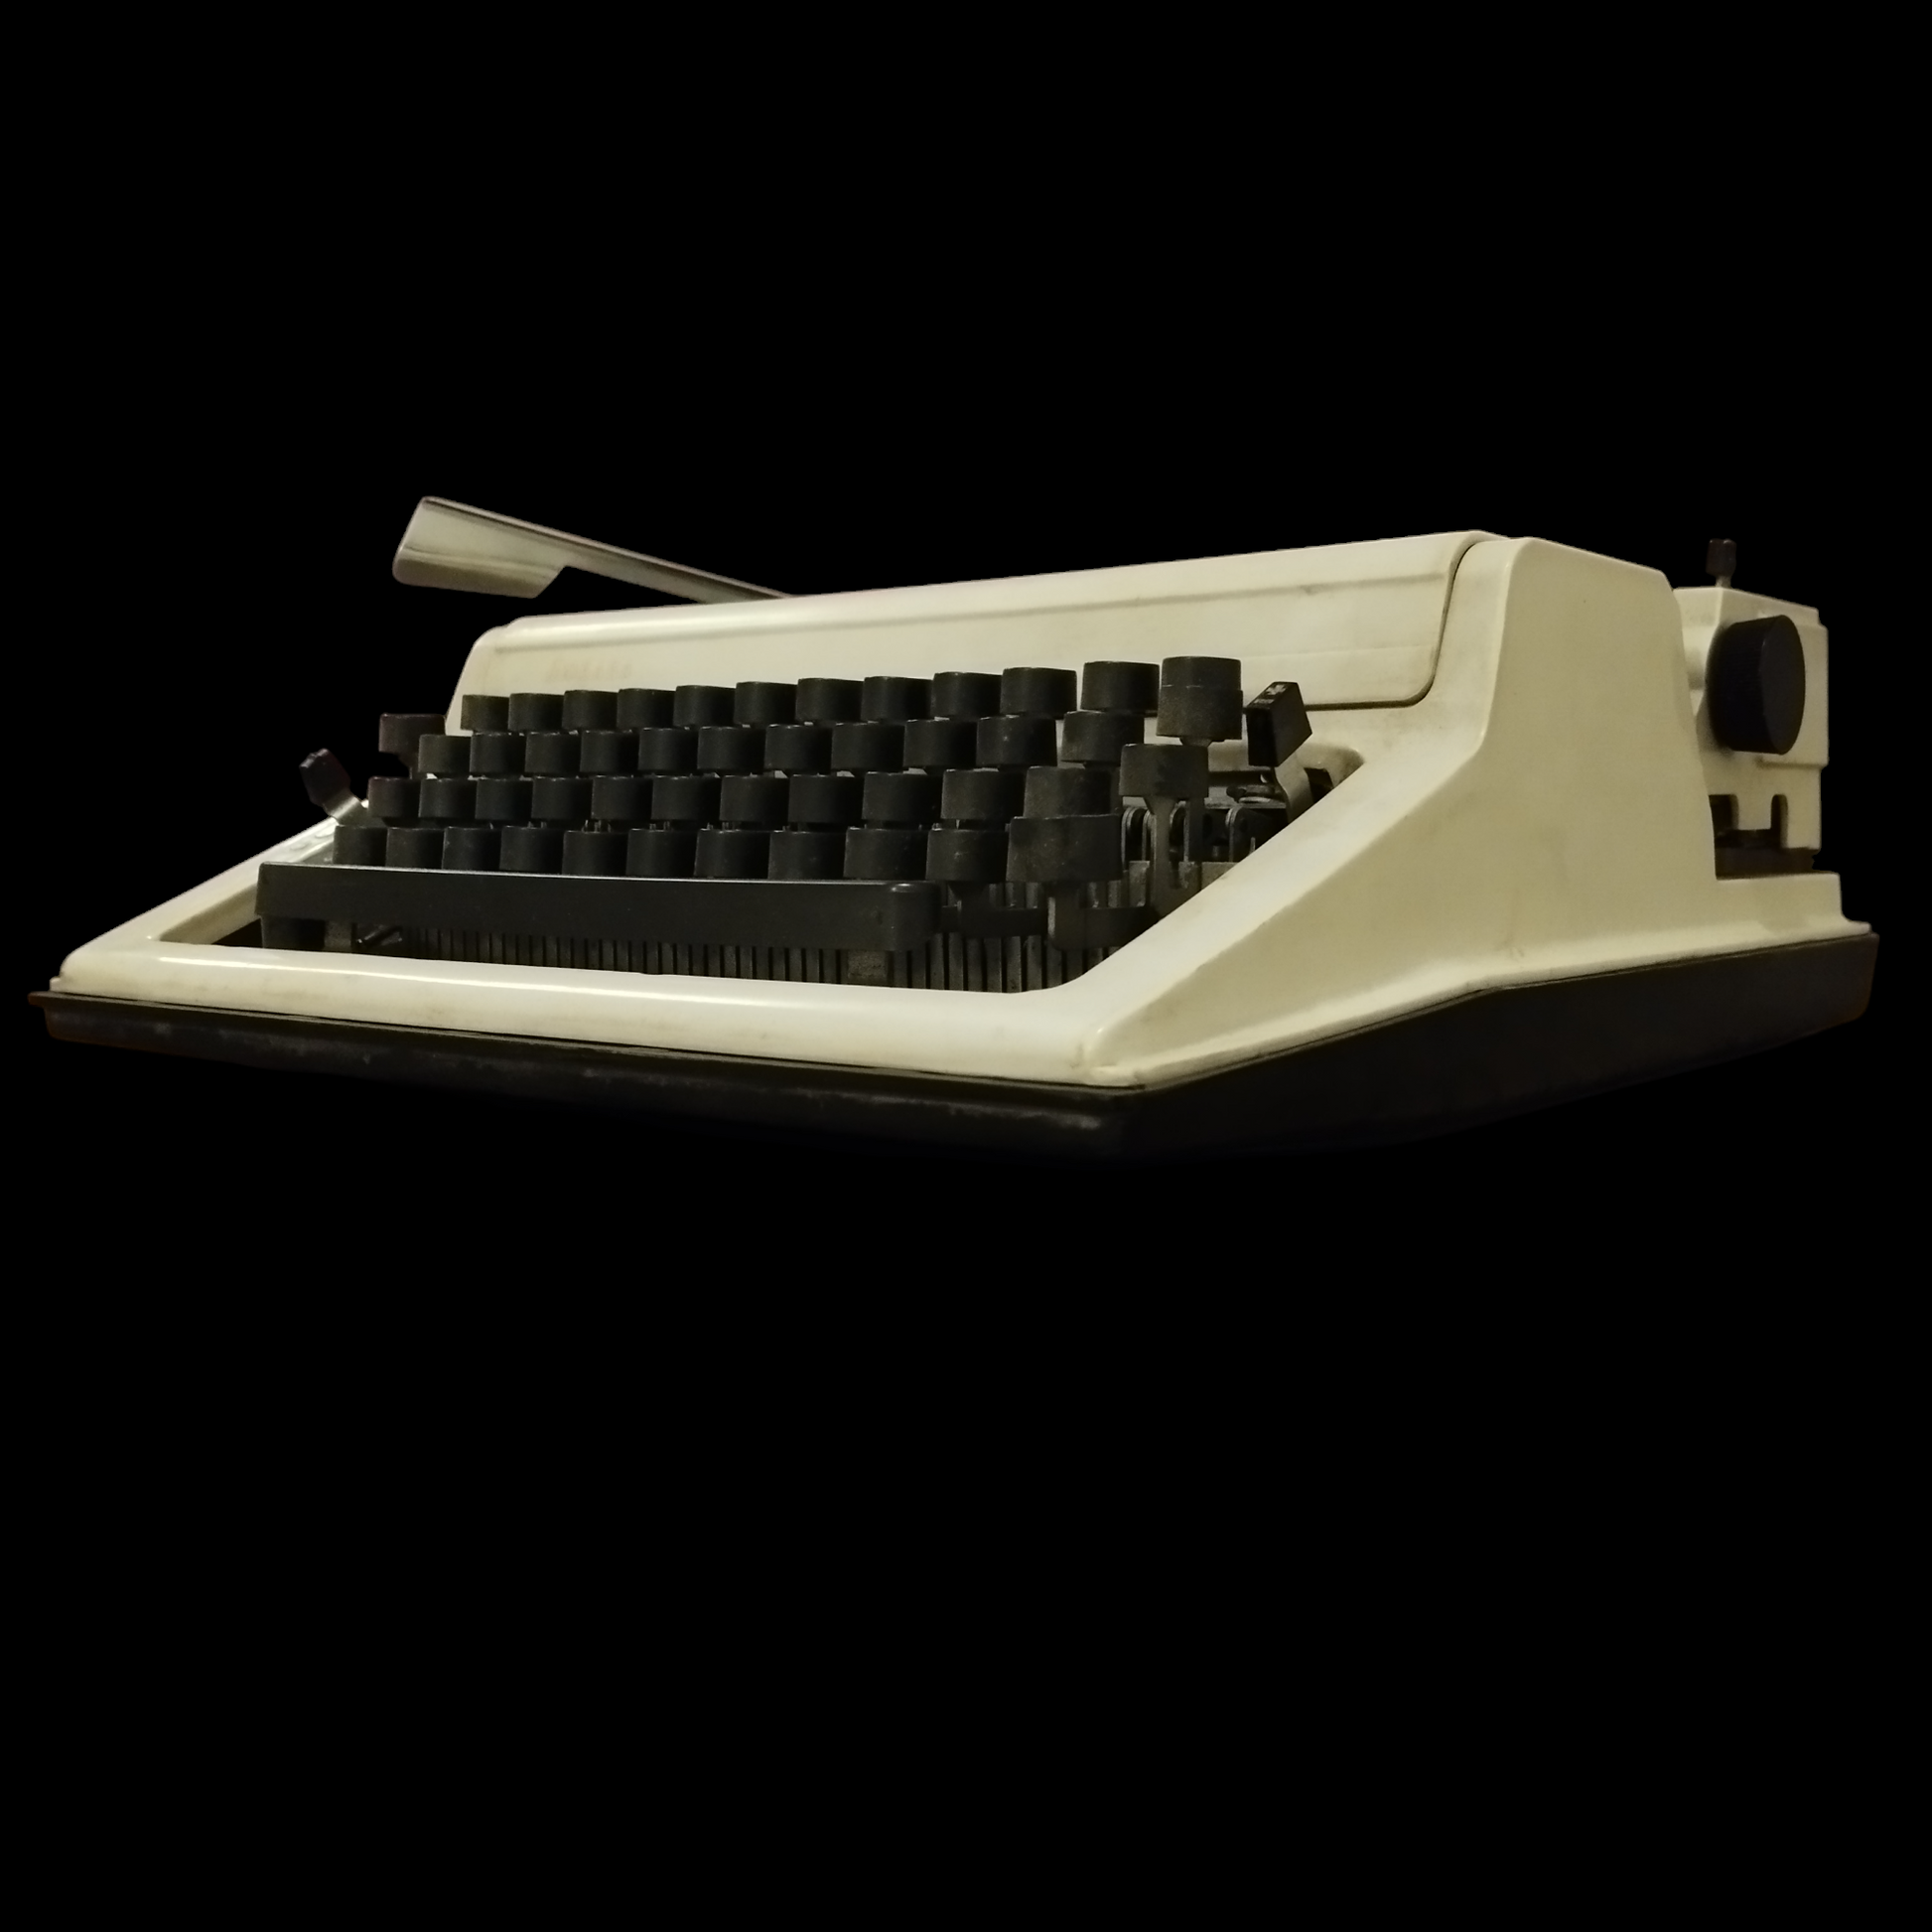 Image of Russian Keyboard Typewriter. Available from universaltypewritercompany.in